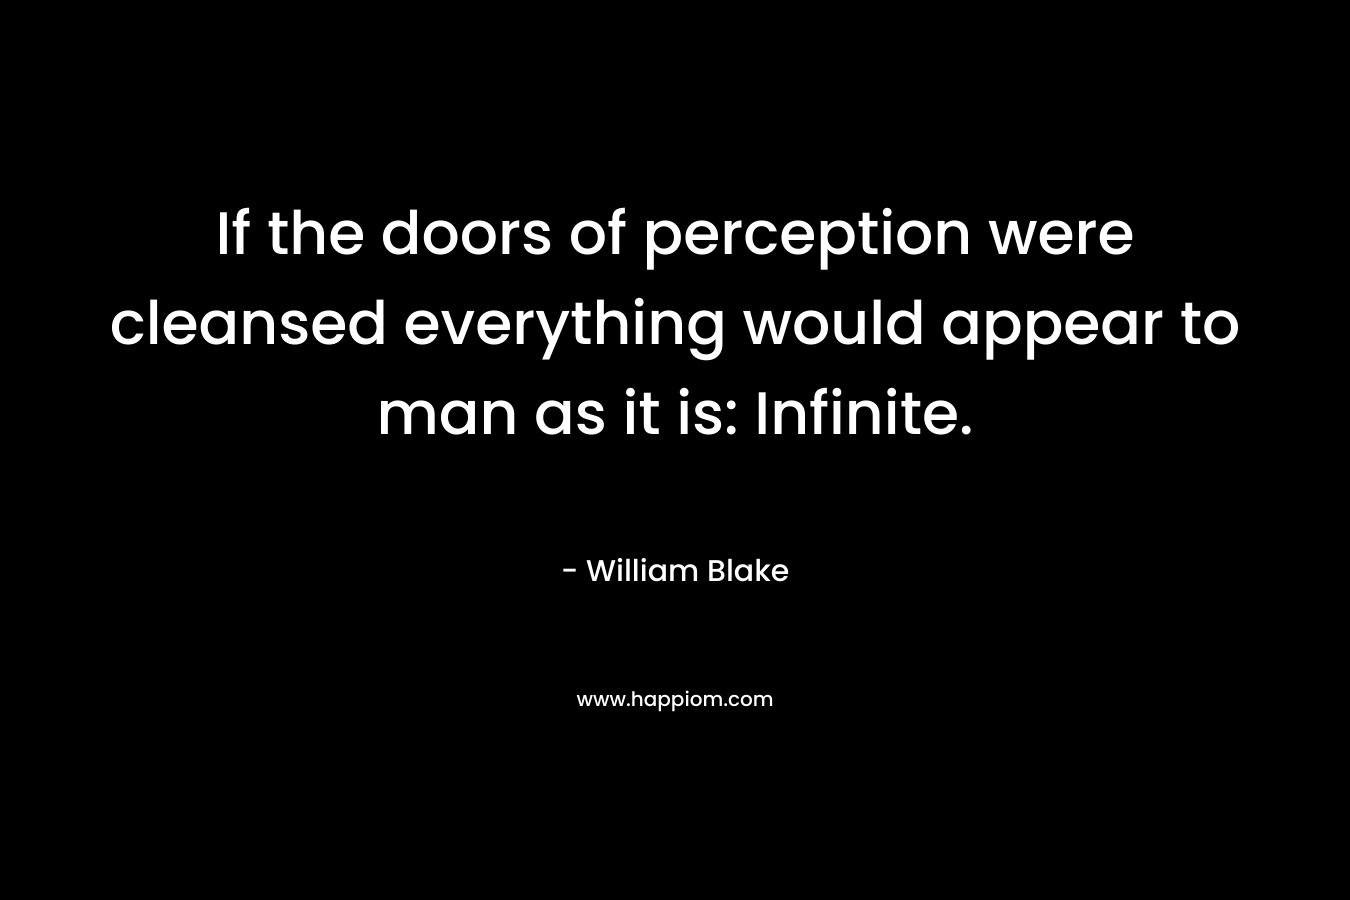 If the doors of perception were cleansed everything would appear to man as it is: Infinite. – William Blake